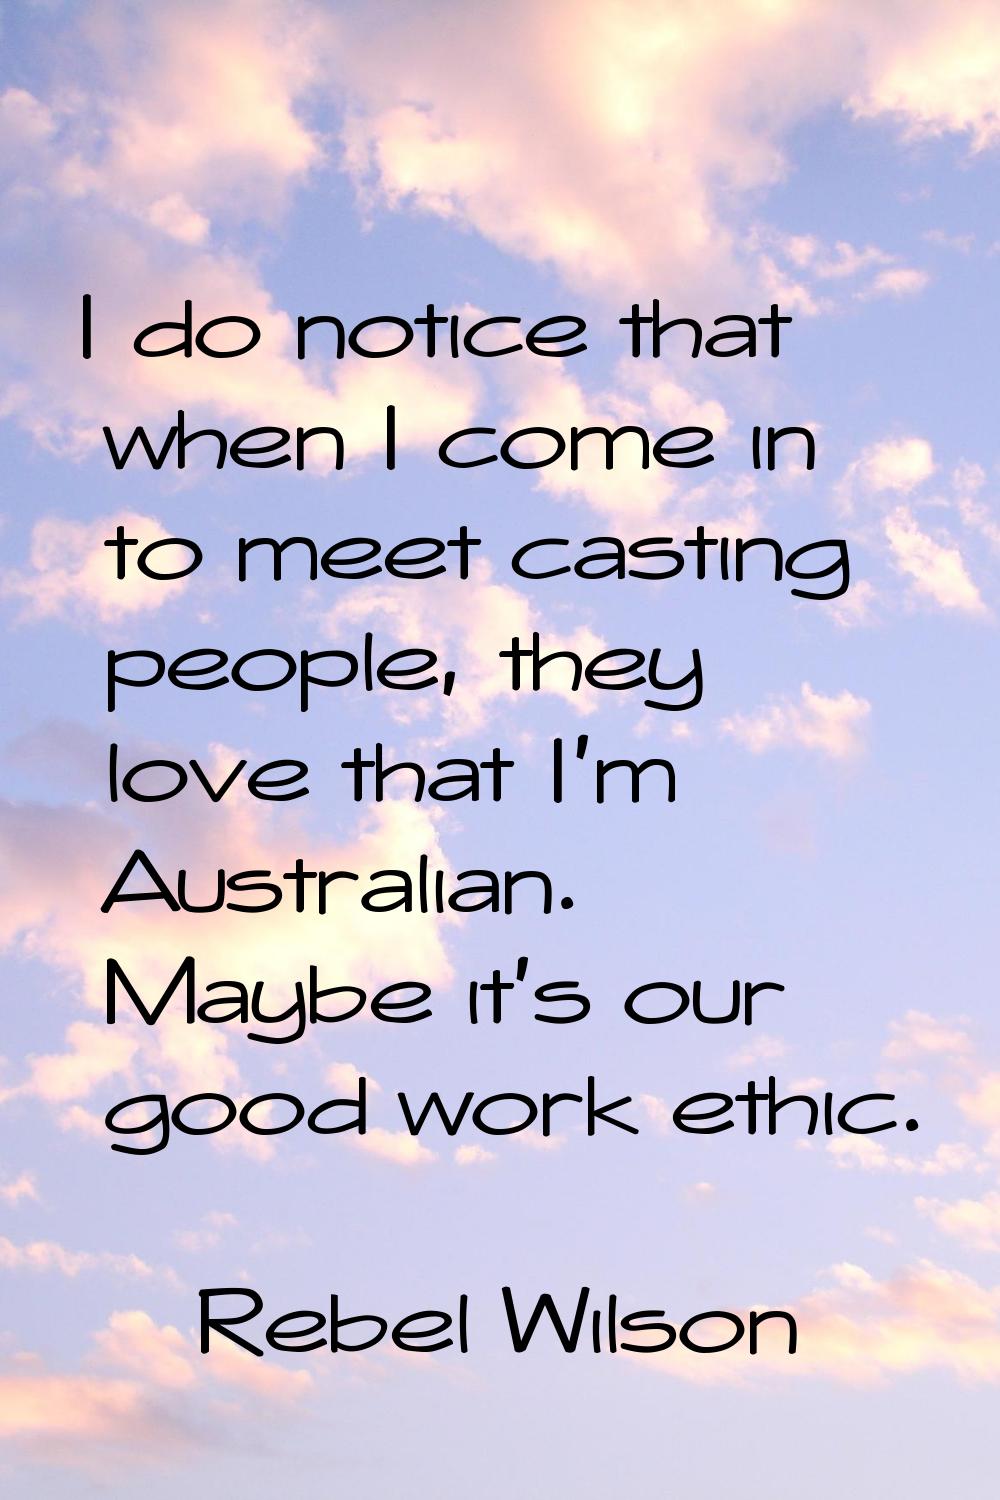 I do notice that when I come in to meet casting people, they love that I'm Australian. Maybe it's o